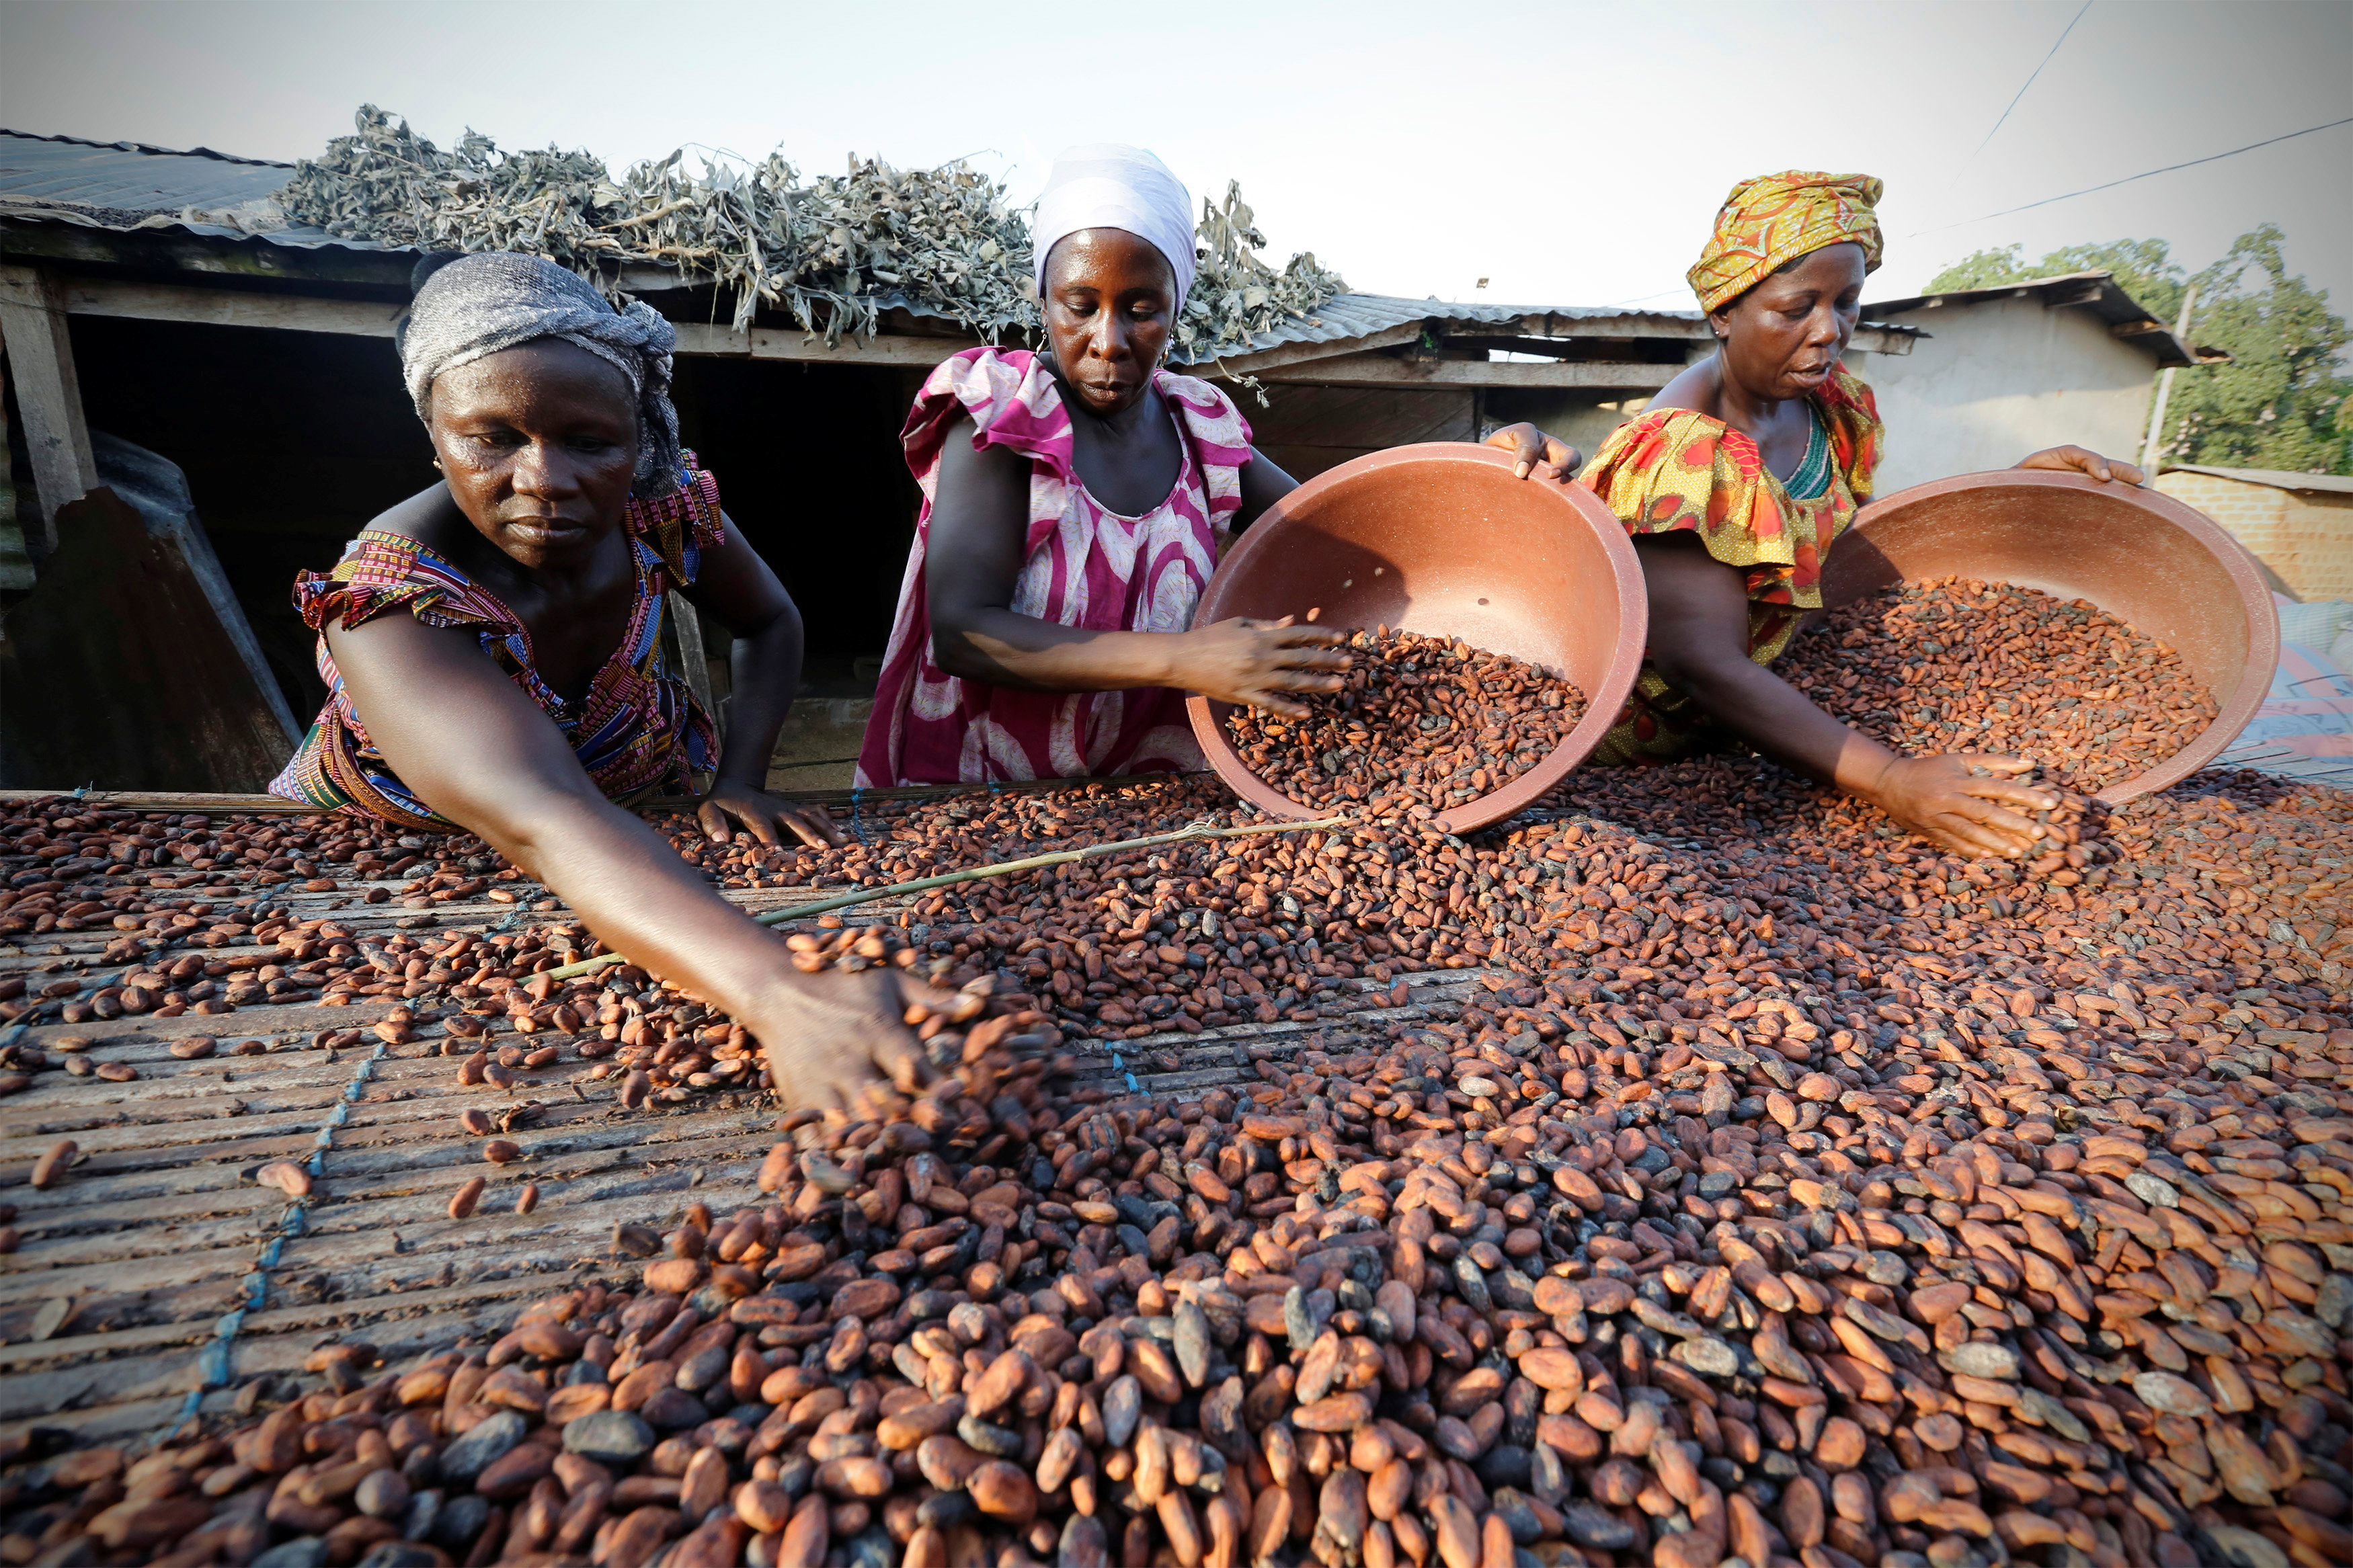 Africa in the news Côte d’Ivoire and Ghana set cocoa prices, emerging